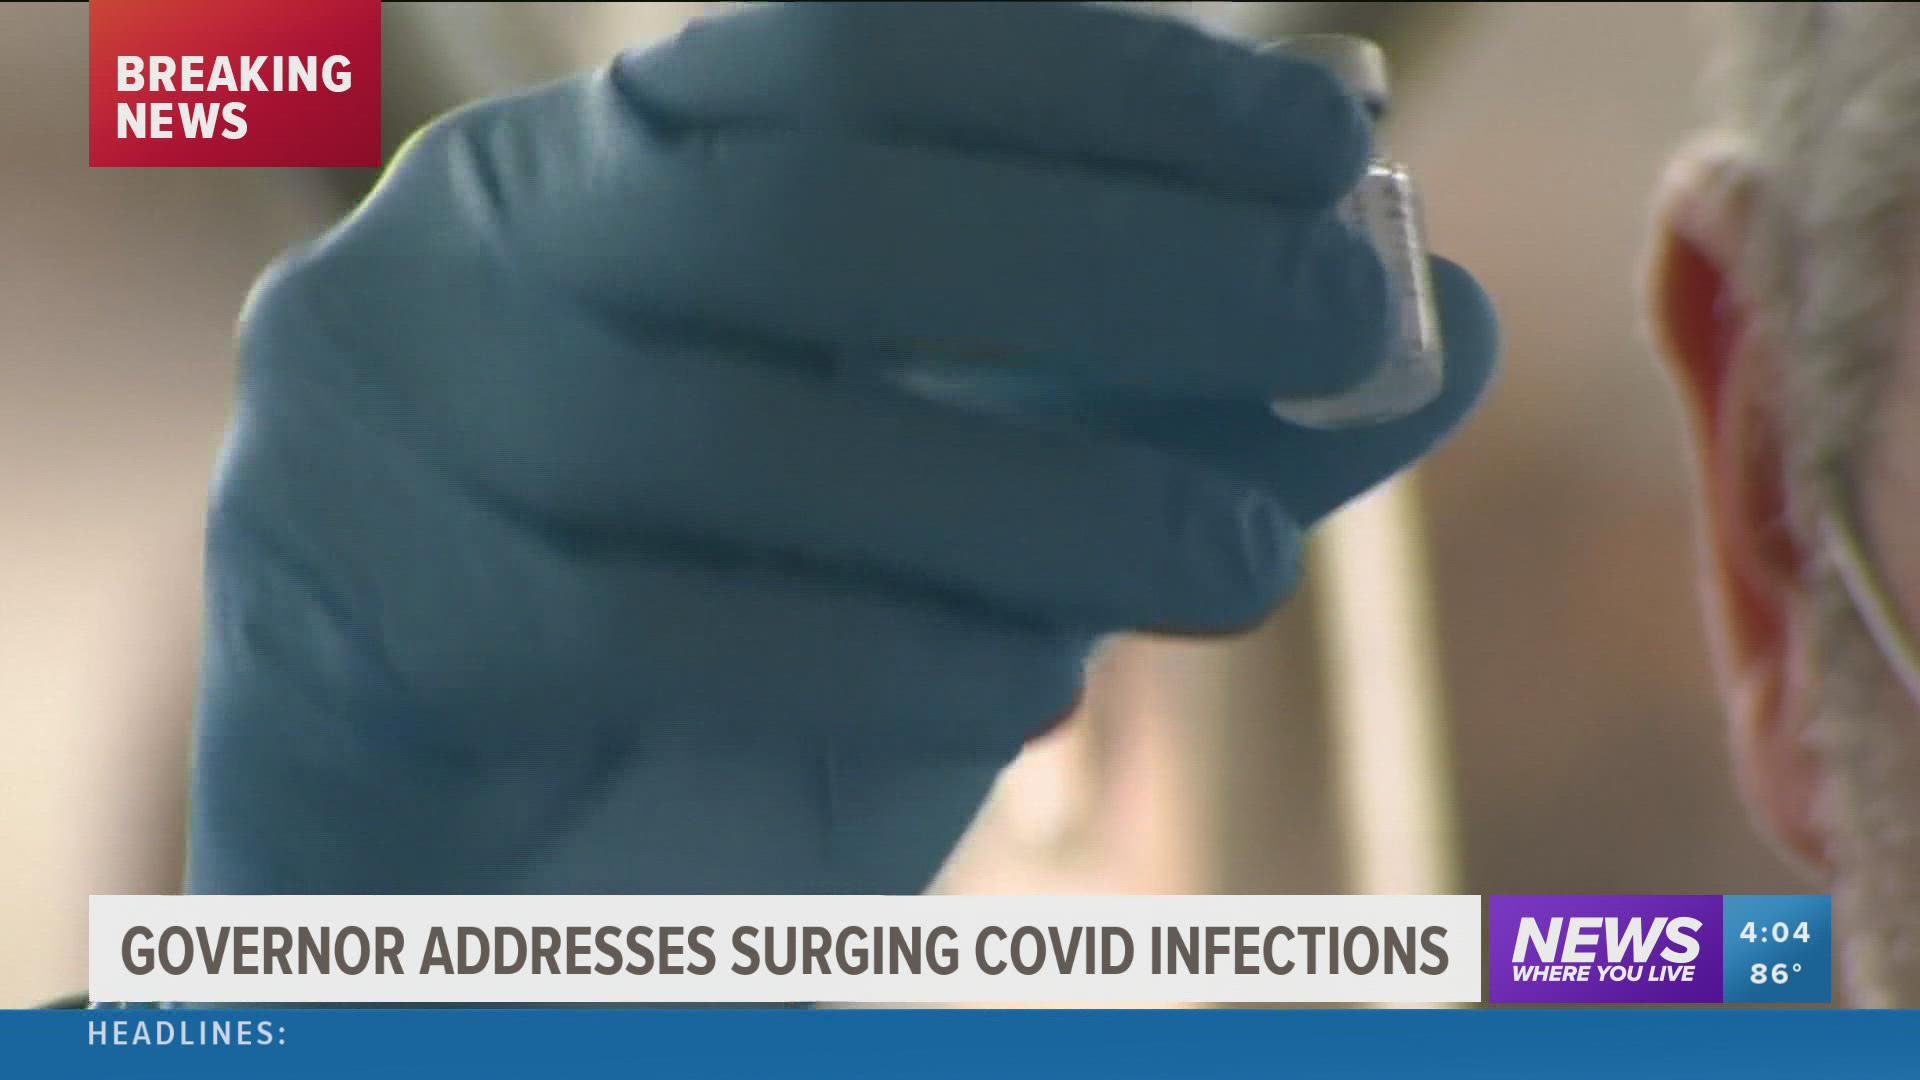 Gov. Asa Hutchinson addressed the surging COVID infections in the state.